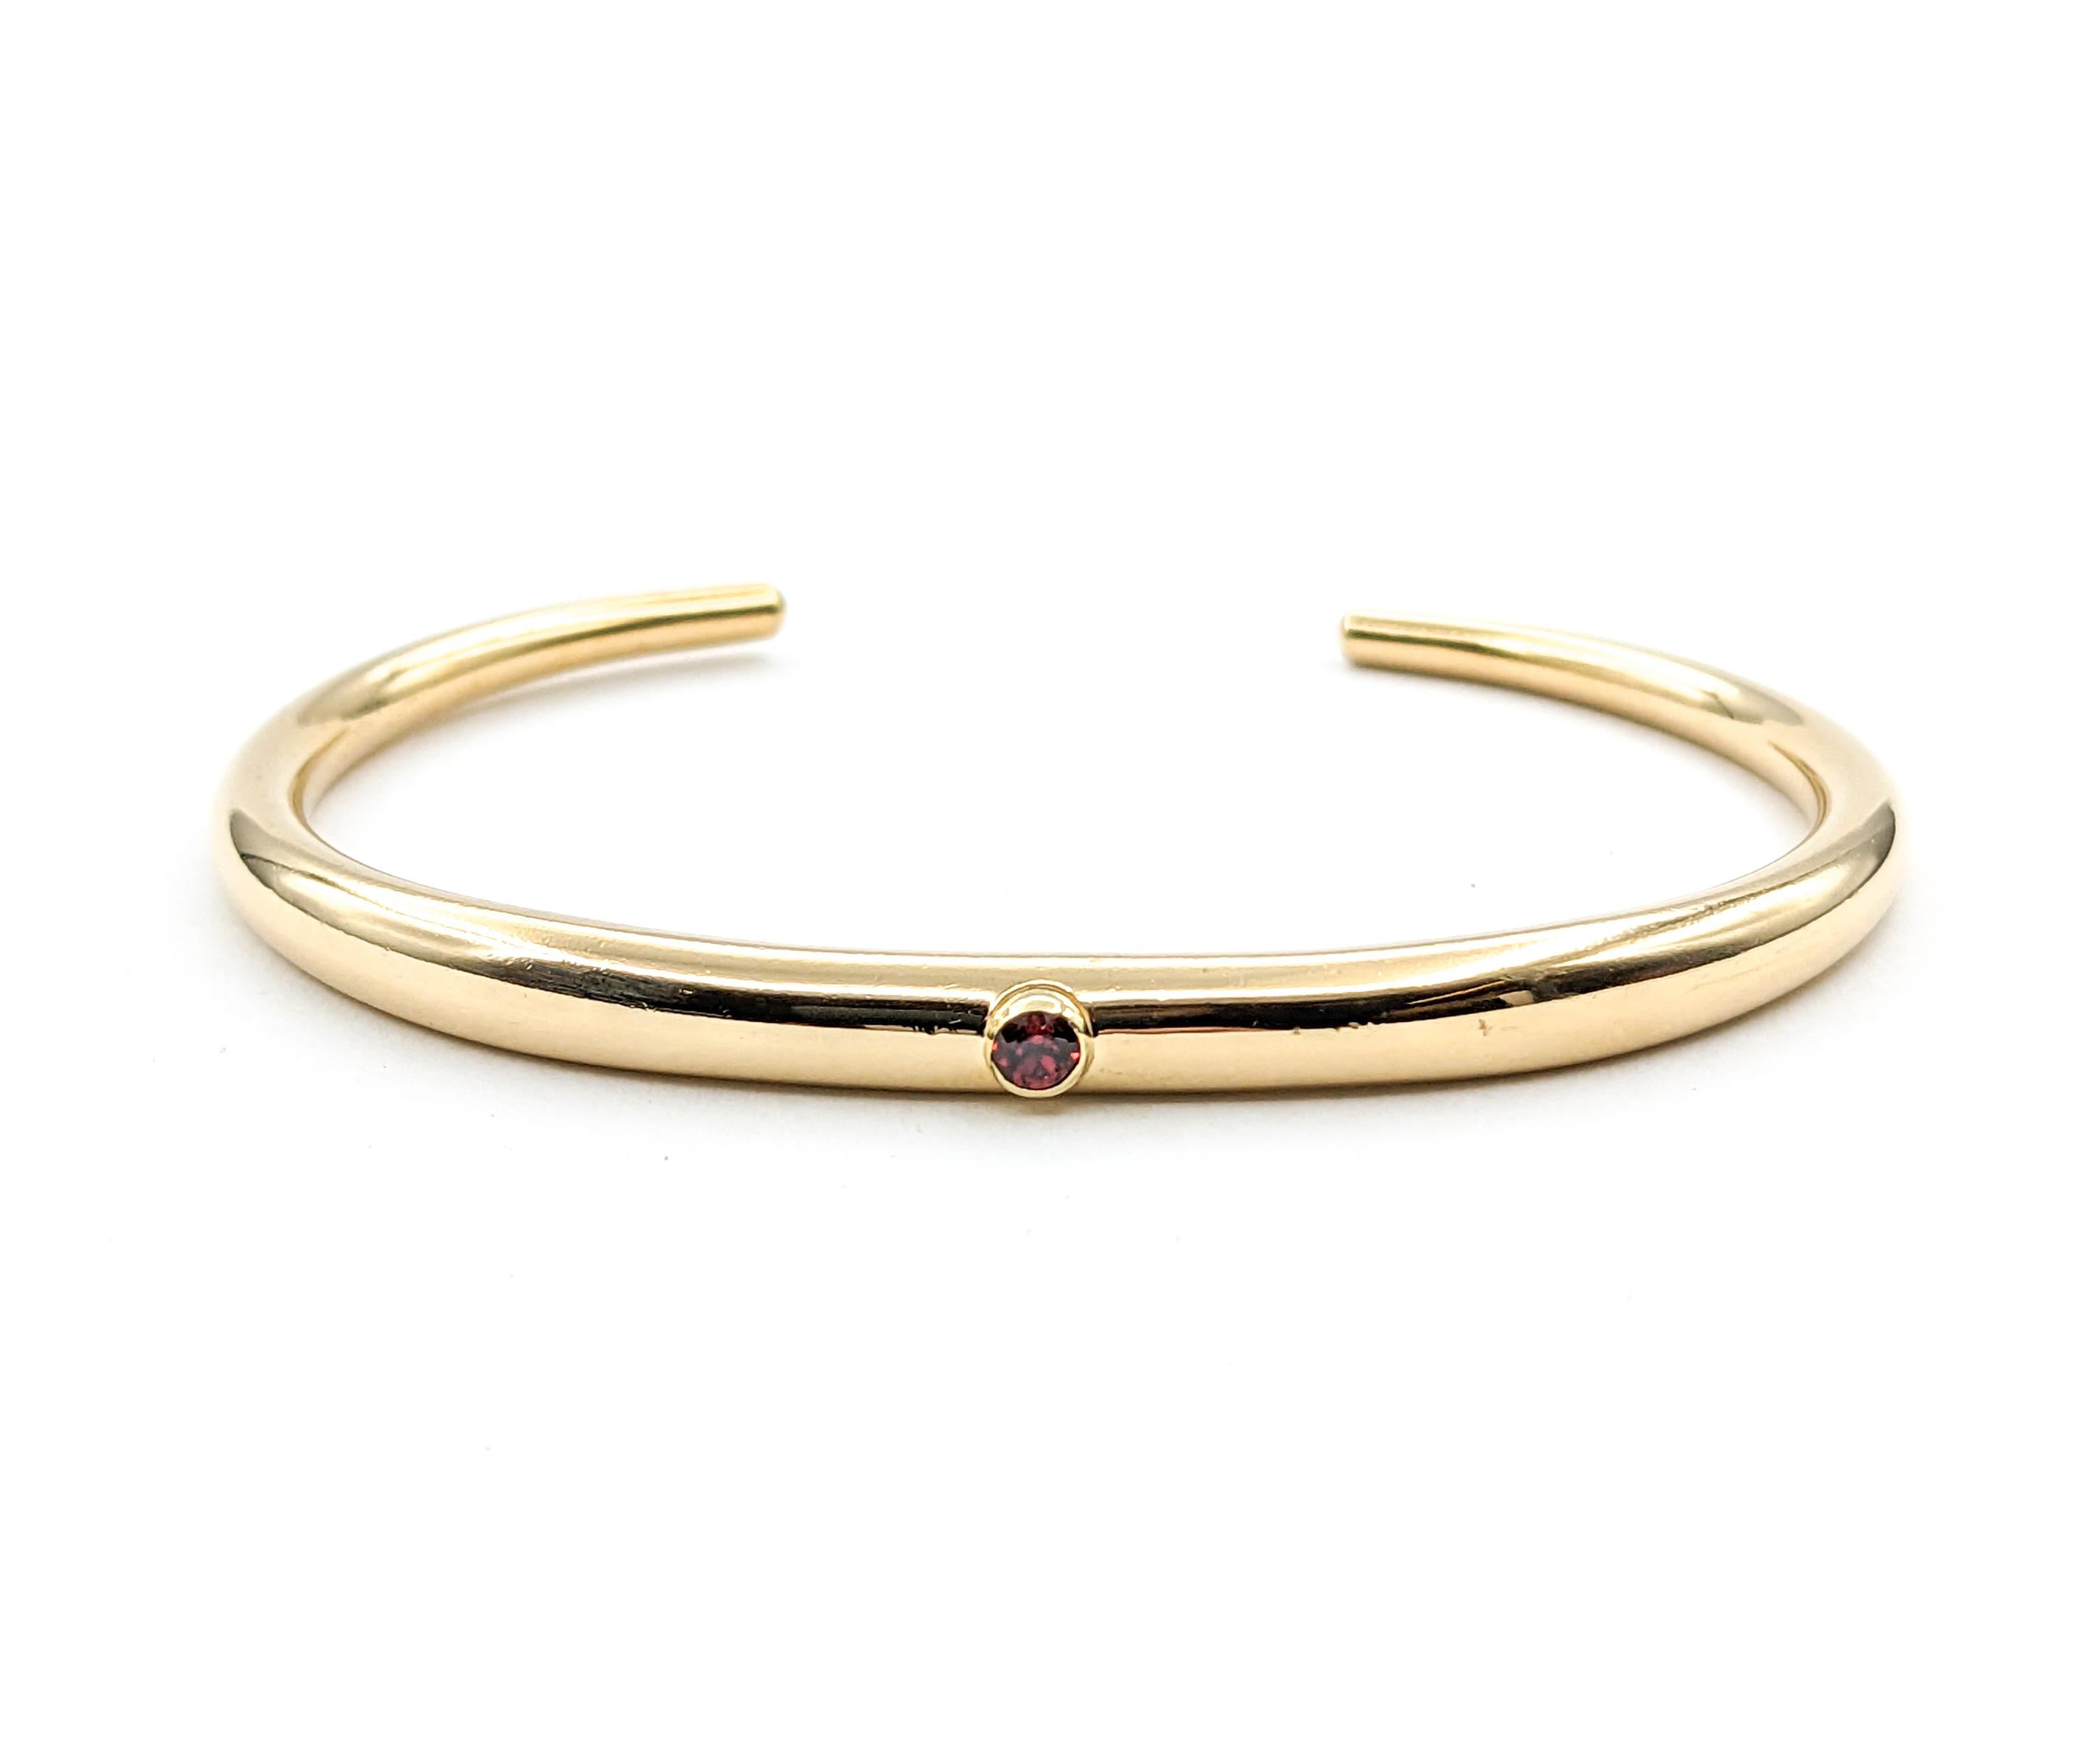 Modern Ed Levin Garnet Cuff Bracelet in Yellow Gold

Experience timeless beauty with our vintage Ed Levin cuff bracelet, expertly fashioned in 14-karat yellow gold. At the center of this exquisite piece is a bezel set .14ct round garnet, sparkling